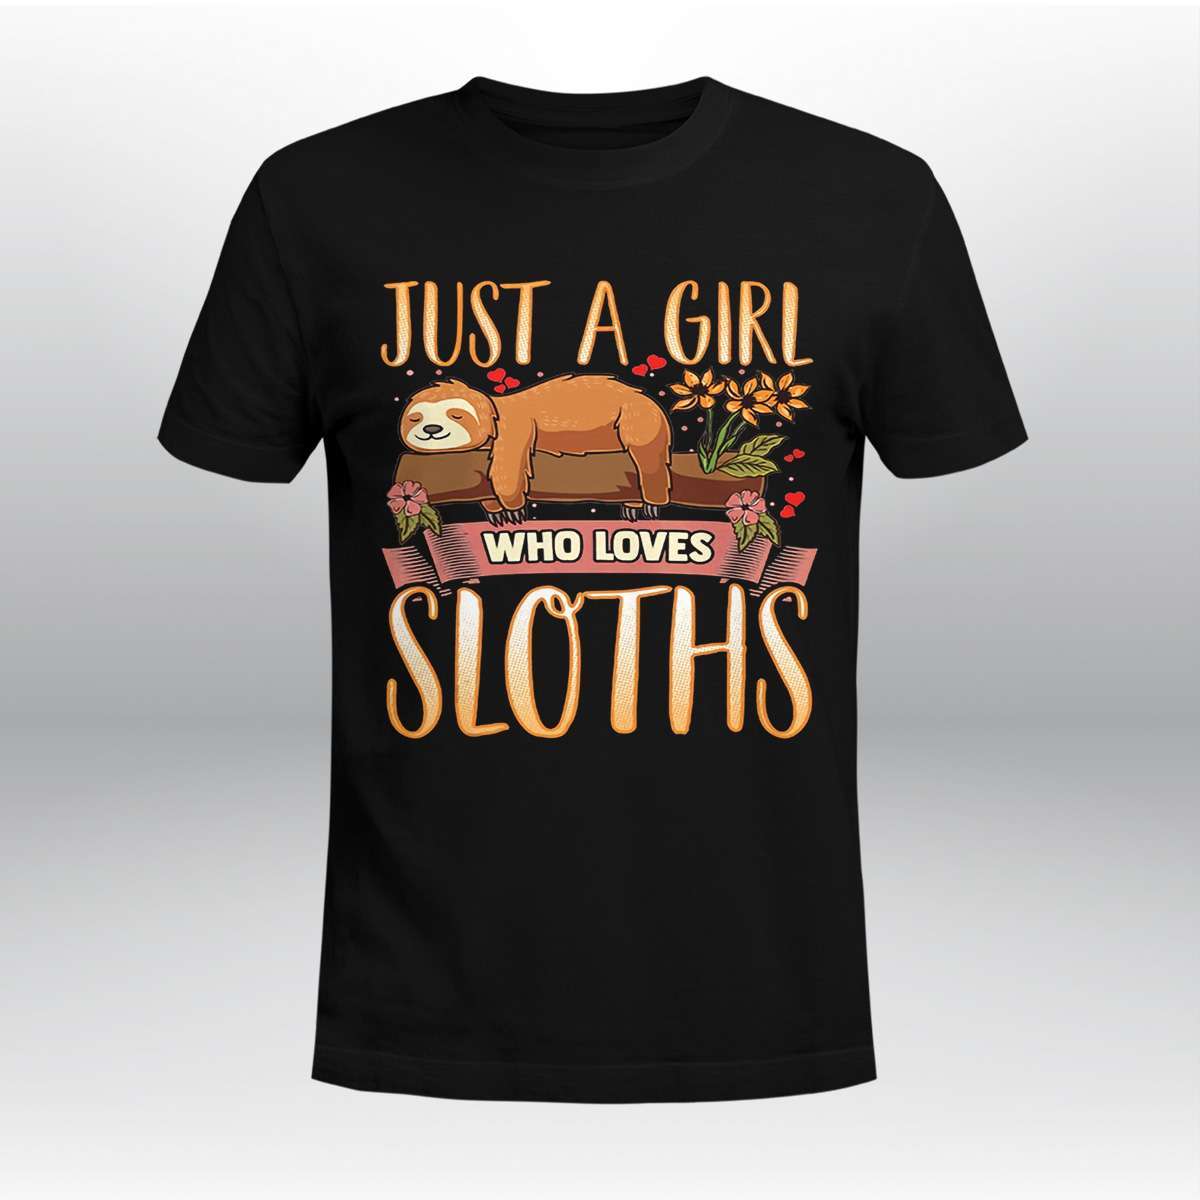 Just a girl who loves sloths - Gift for sloth lover, sloth lazy animal